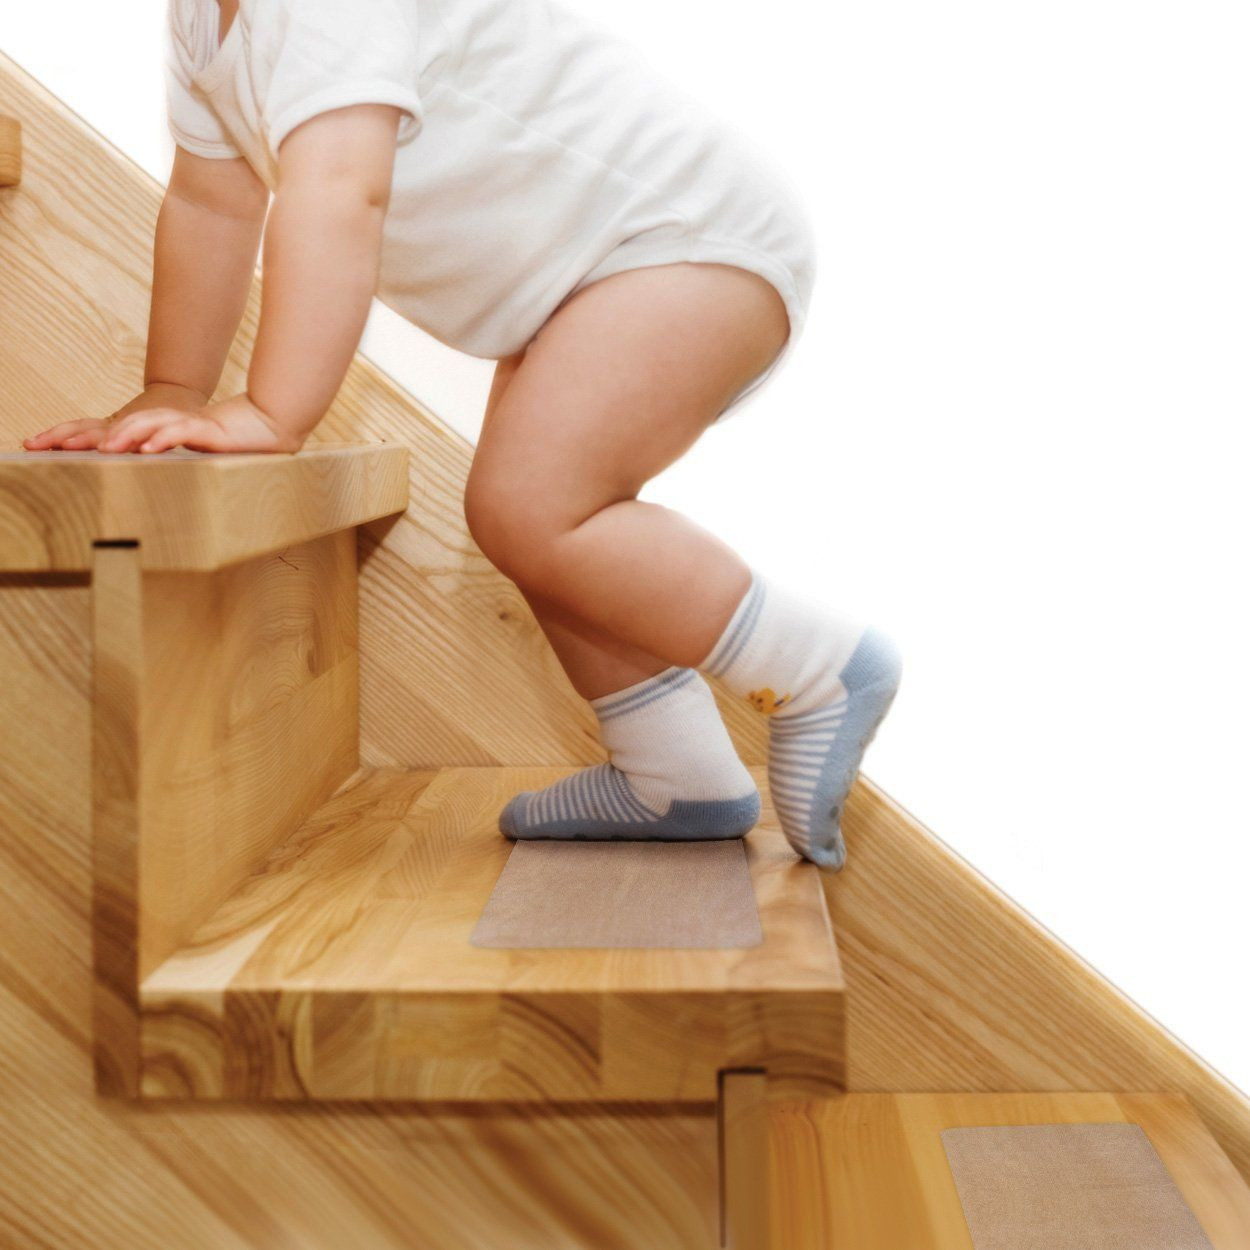 29 Wonderful Hardwood Floor Stairs Slippery 2024 free download hardwood floor stairs slippery of steady treads set of 10 pvc free non slip clear opaque adhesive with regard to steady treads set of 10 pvc free non slip clear opaque adhesive stair treads 